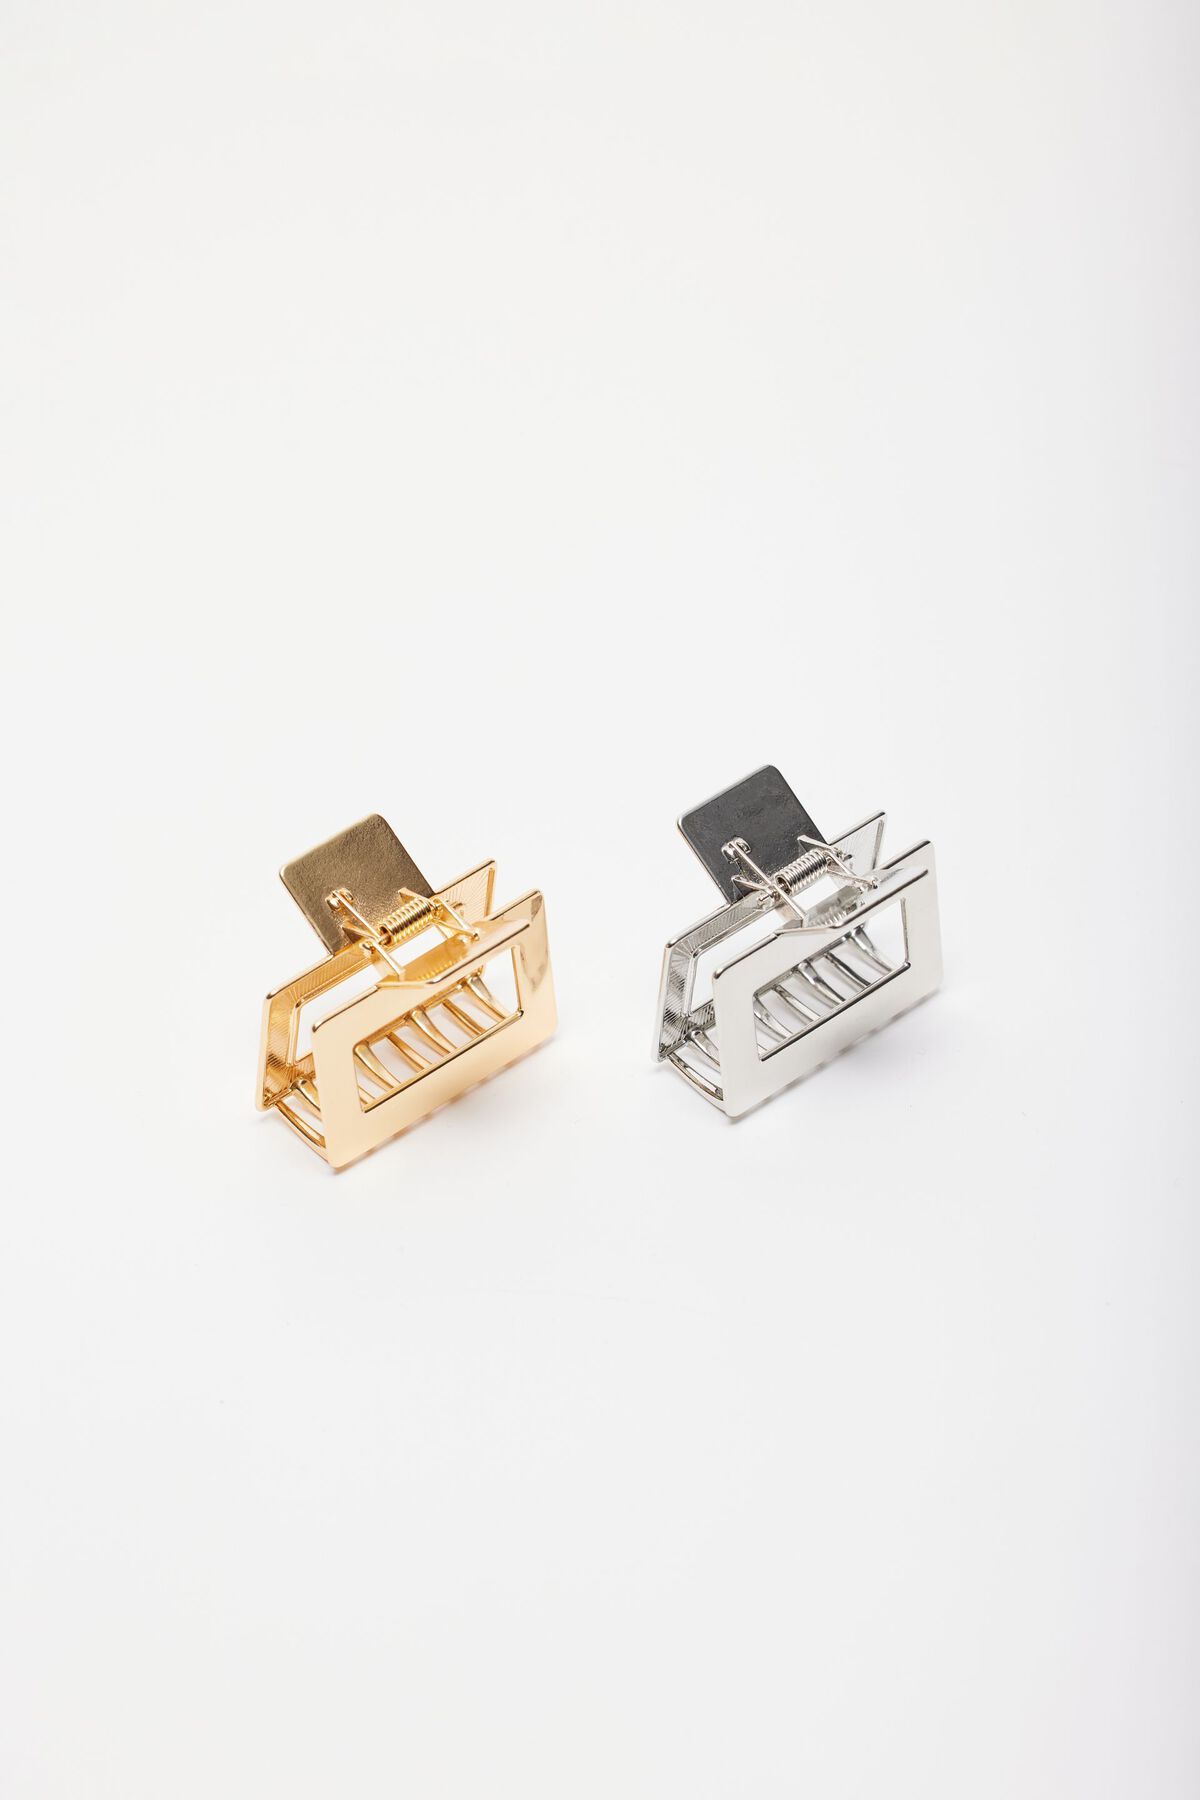 Dynamite 2-Pack Small Square Claw Hair Clip. 4